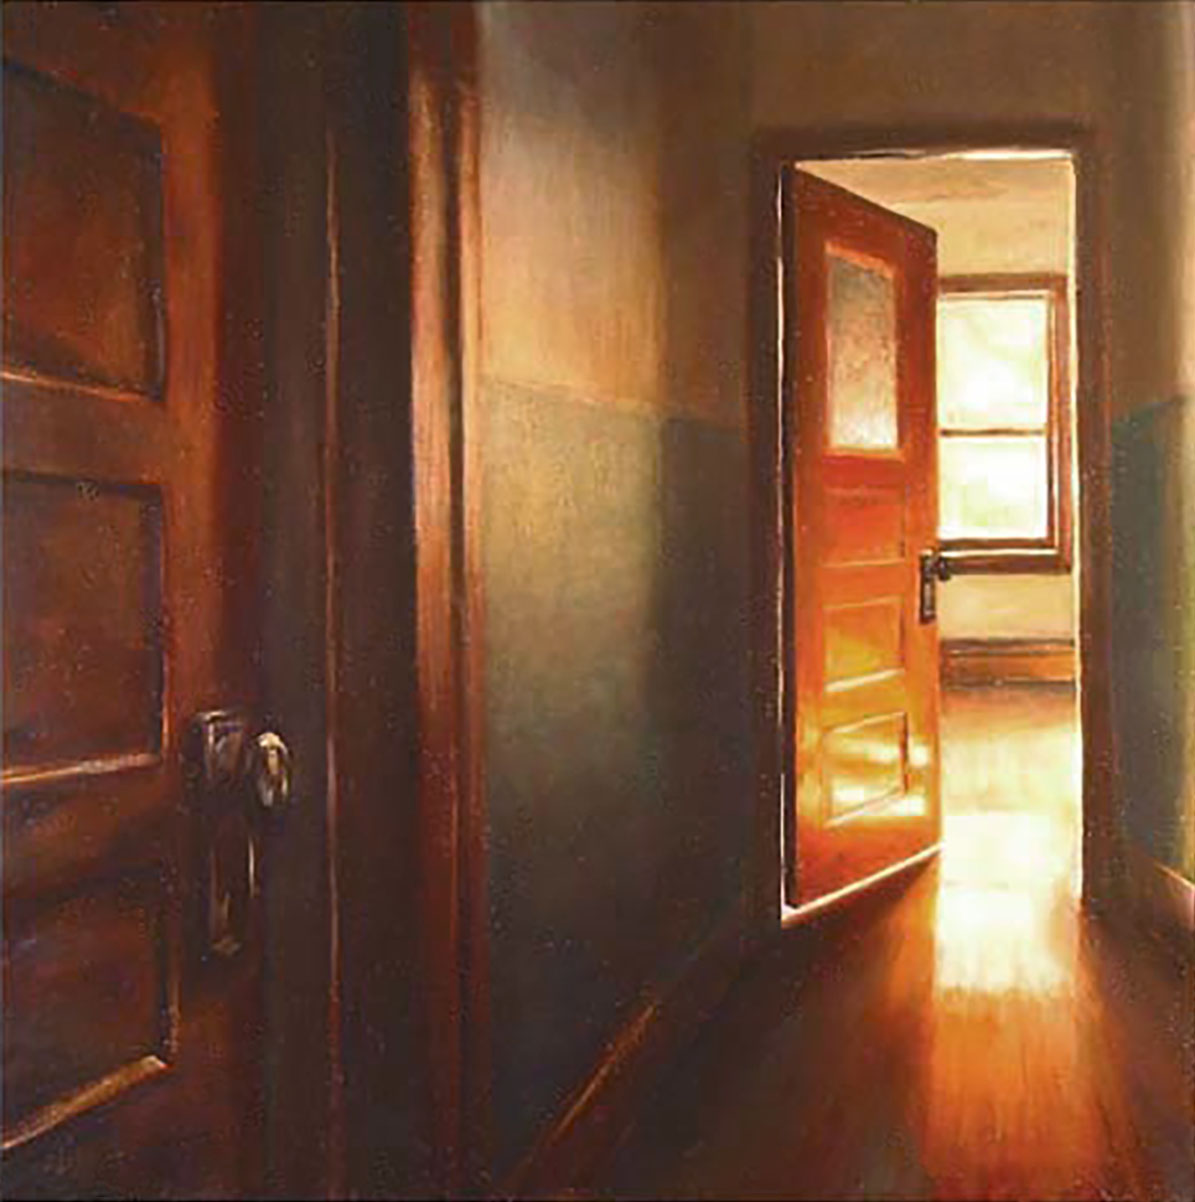   Two Doors   2003  Oil on canvas  20 x 20 inches       